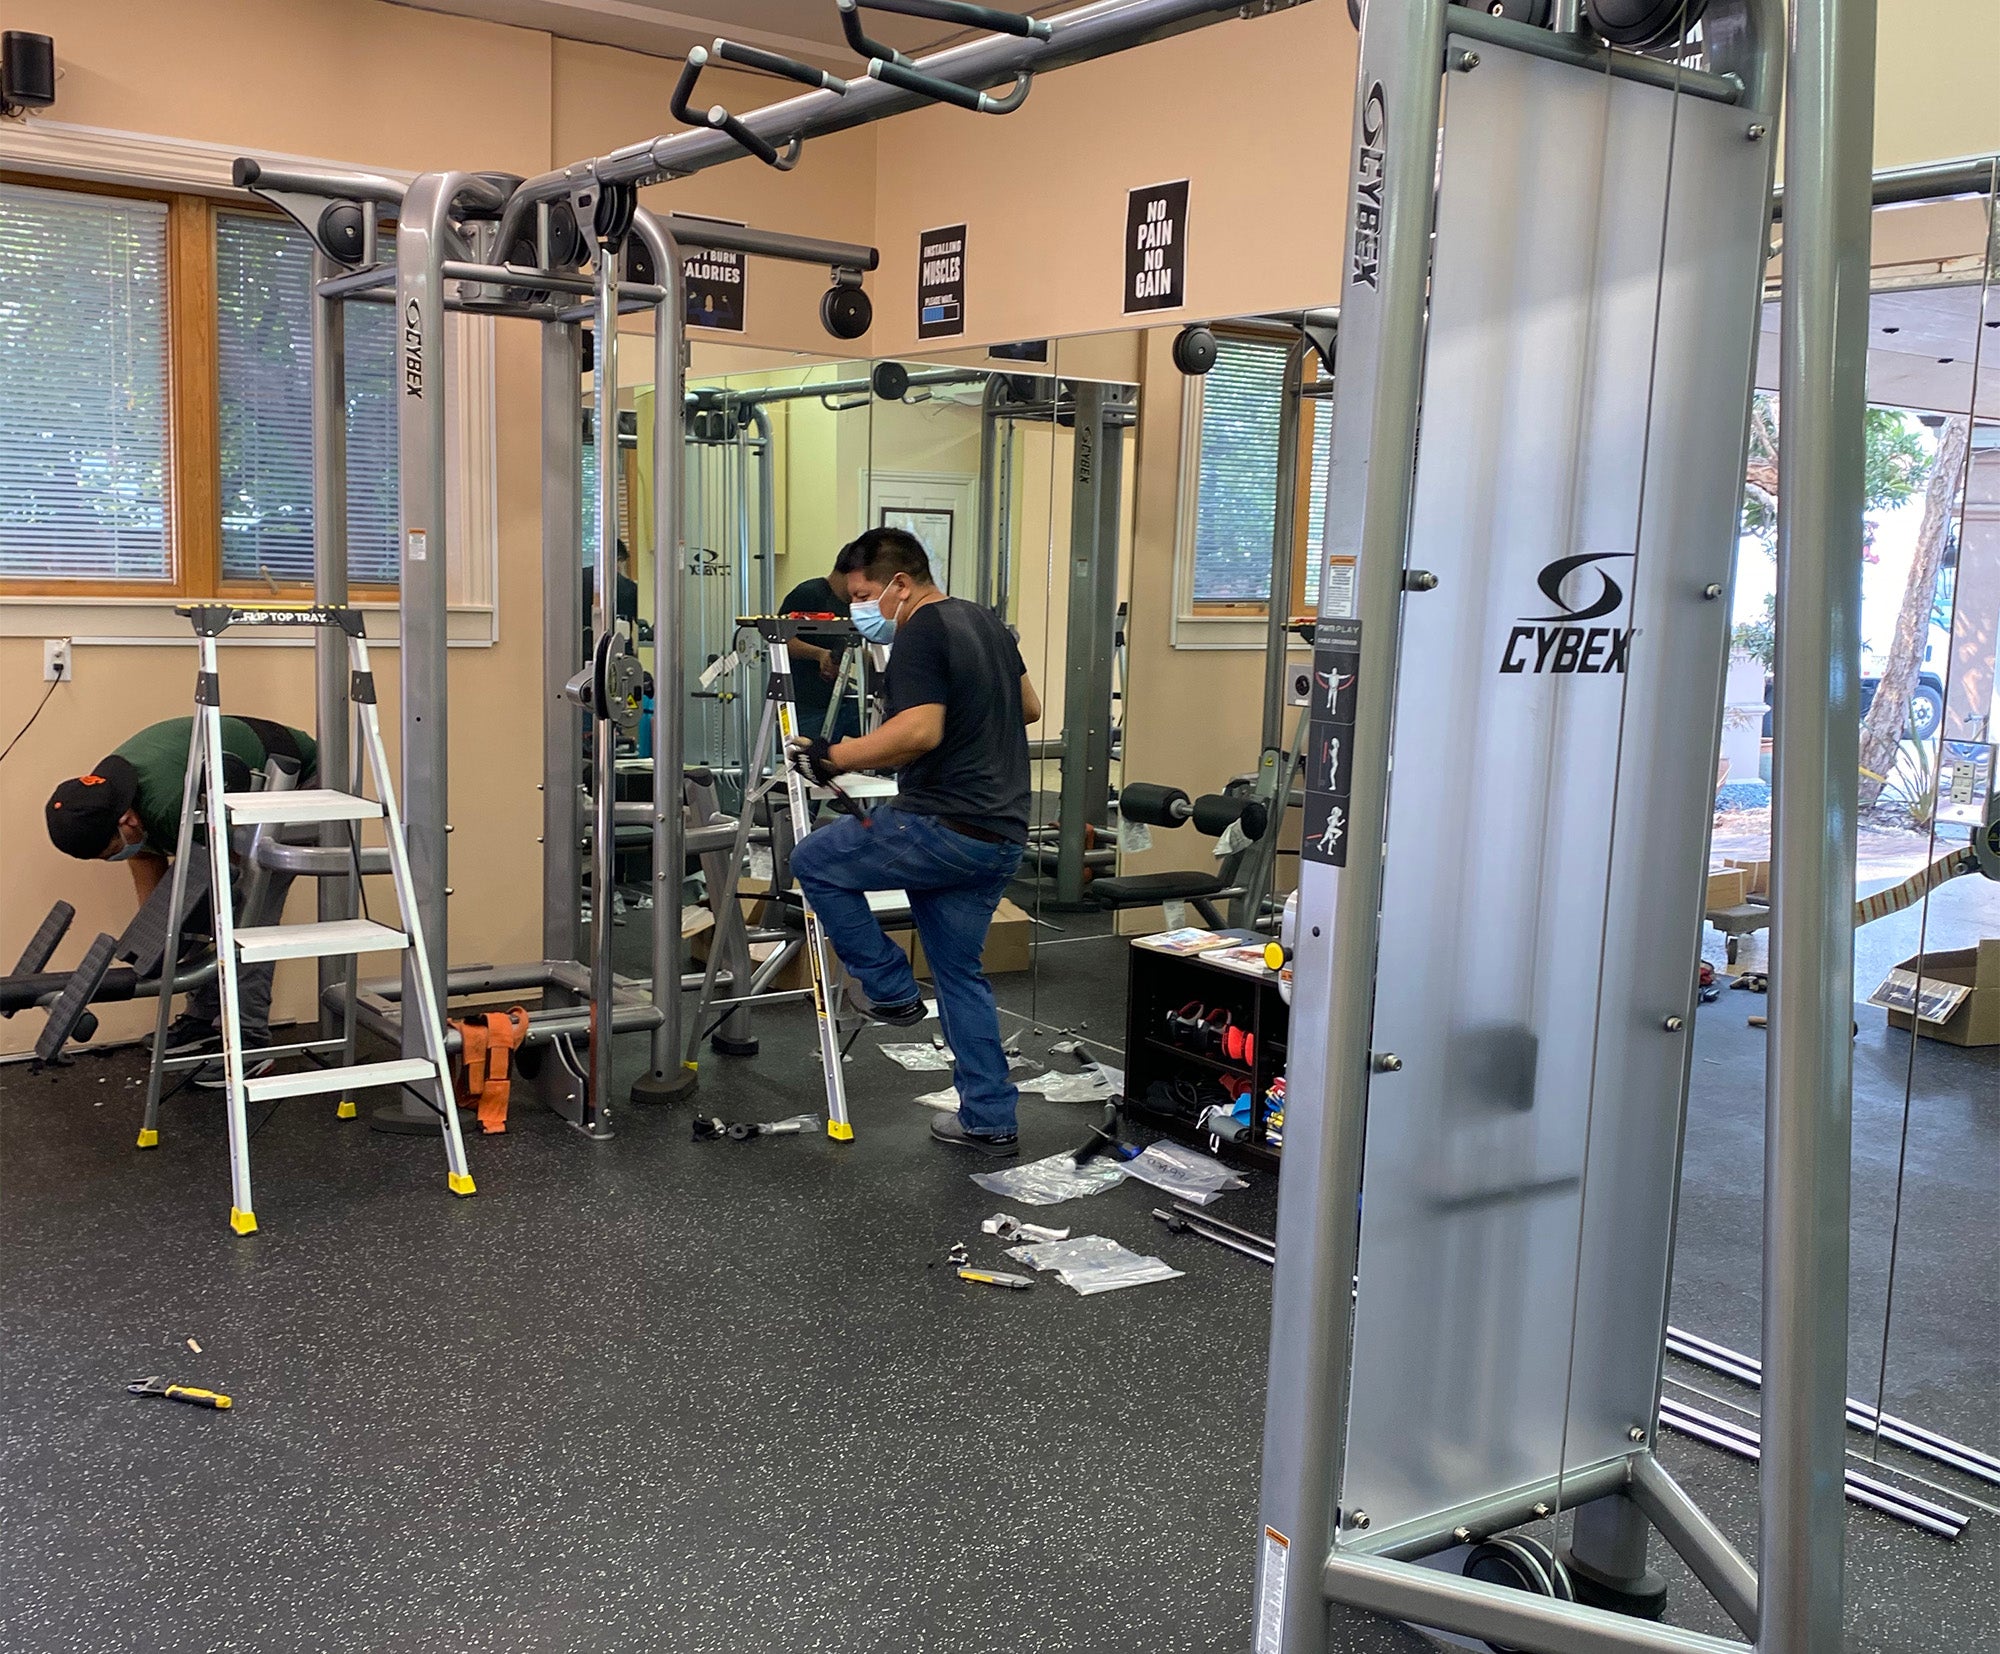 Diagnostics, Repair, and Service by Golden Gate Fitness Repair